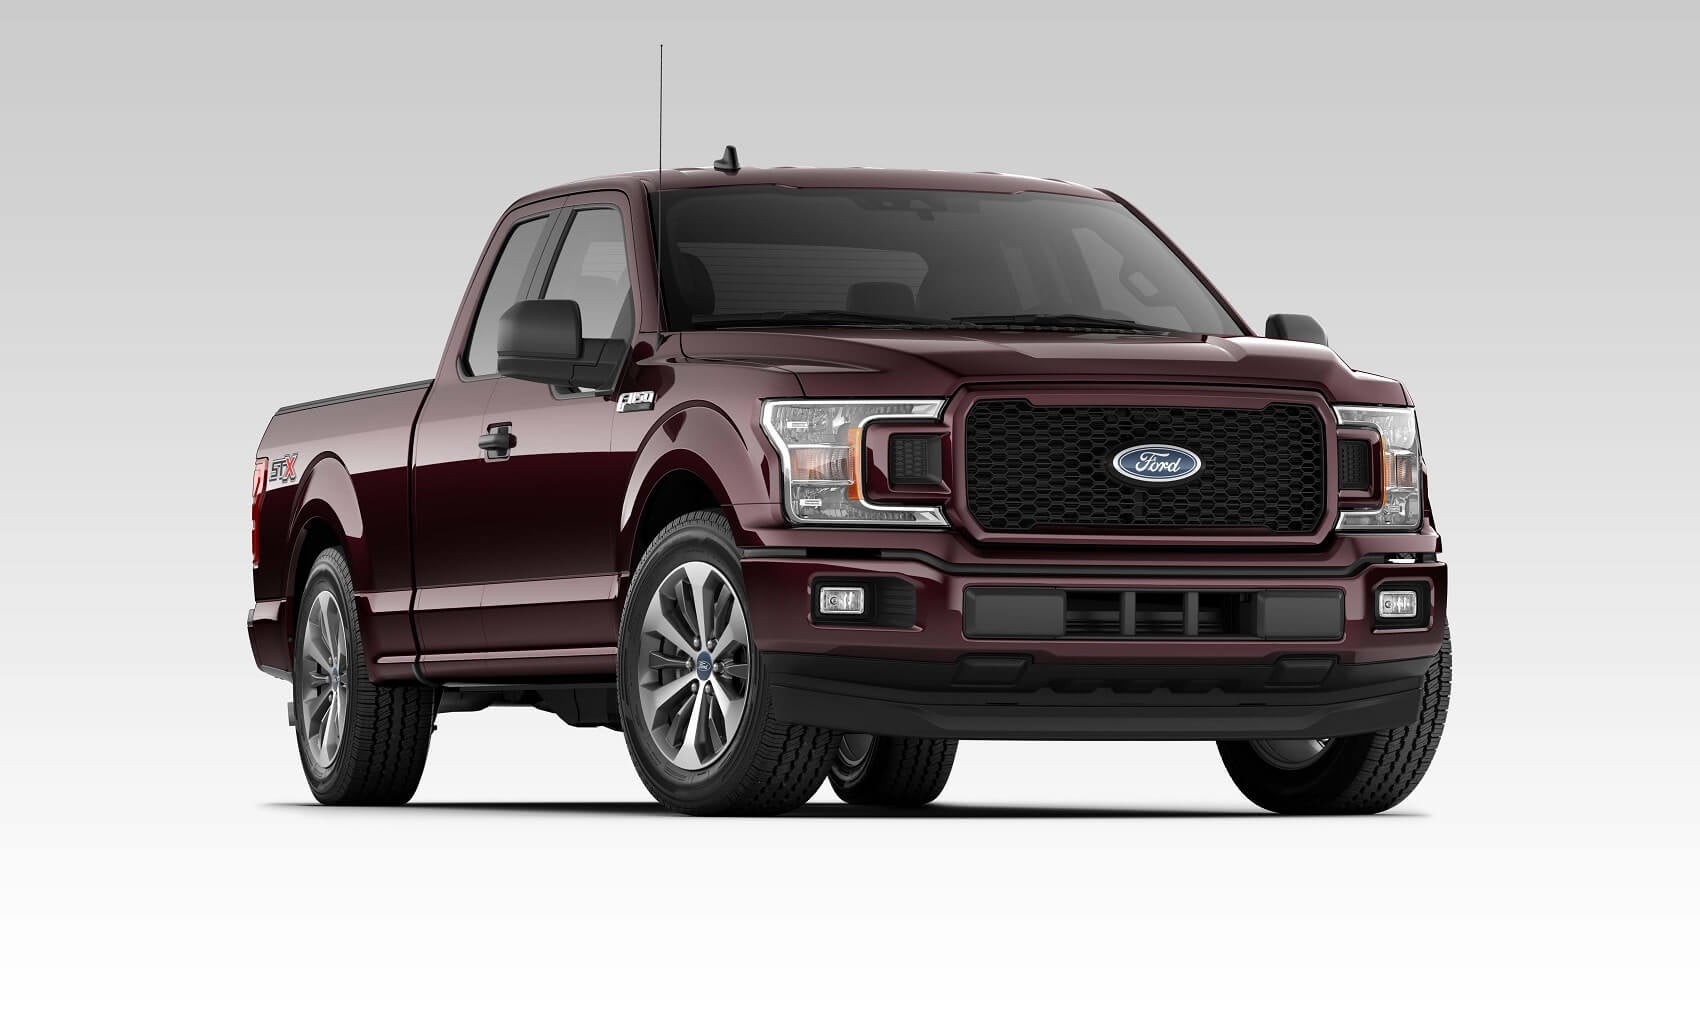 2020 Ford F-150 for Sale Wilkes-Barre PA 